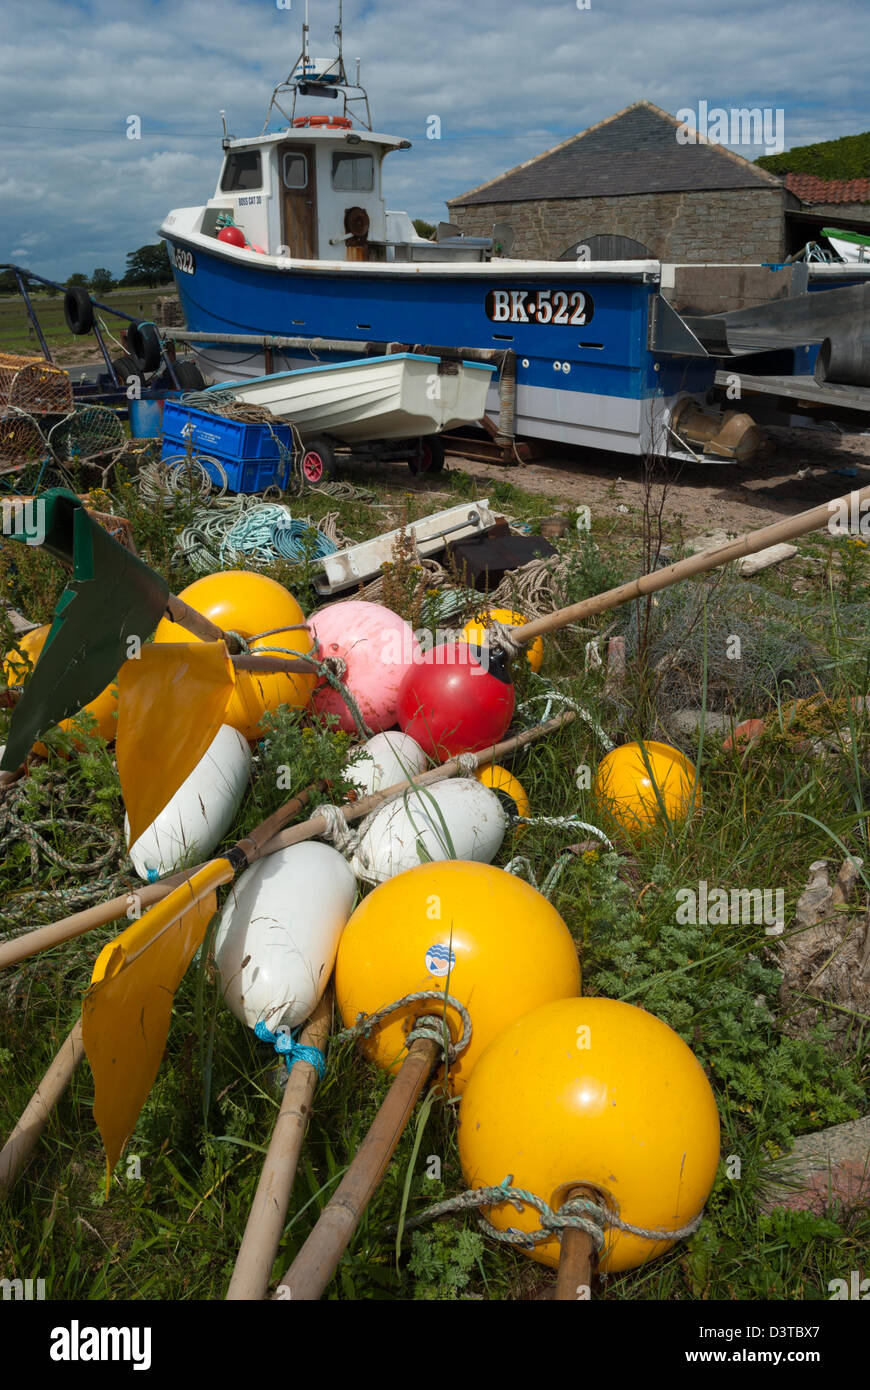 Lobster or crab fishermen's boat and marker floats or buoys, Bulmer, Northumberland Stock Photo